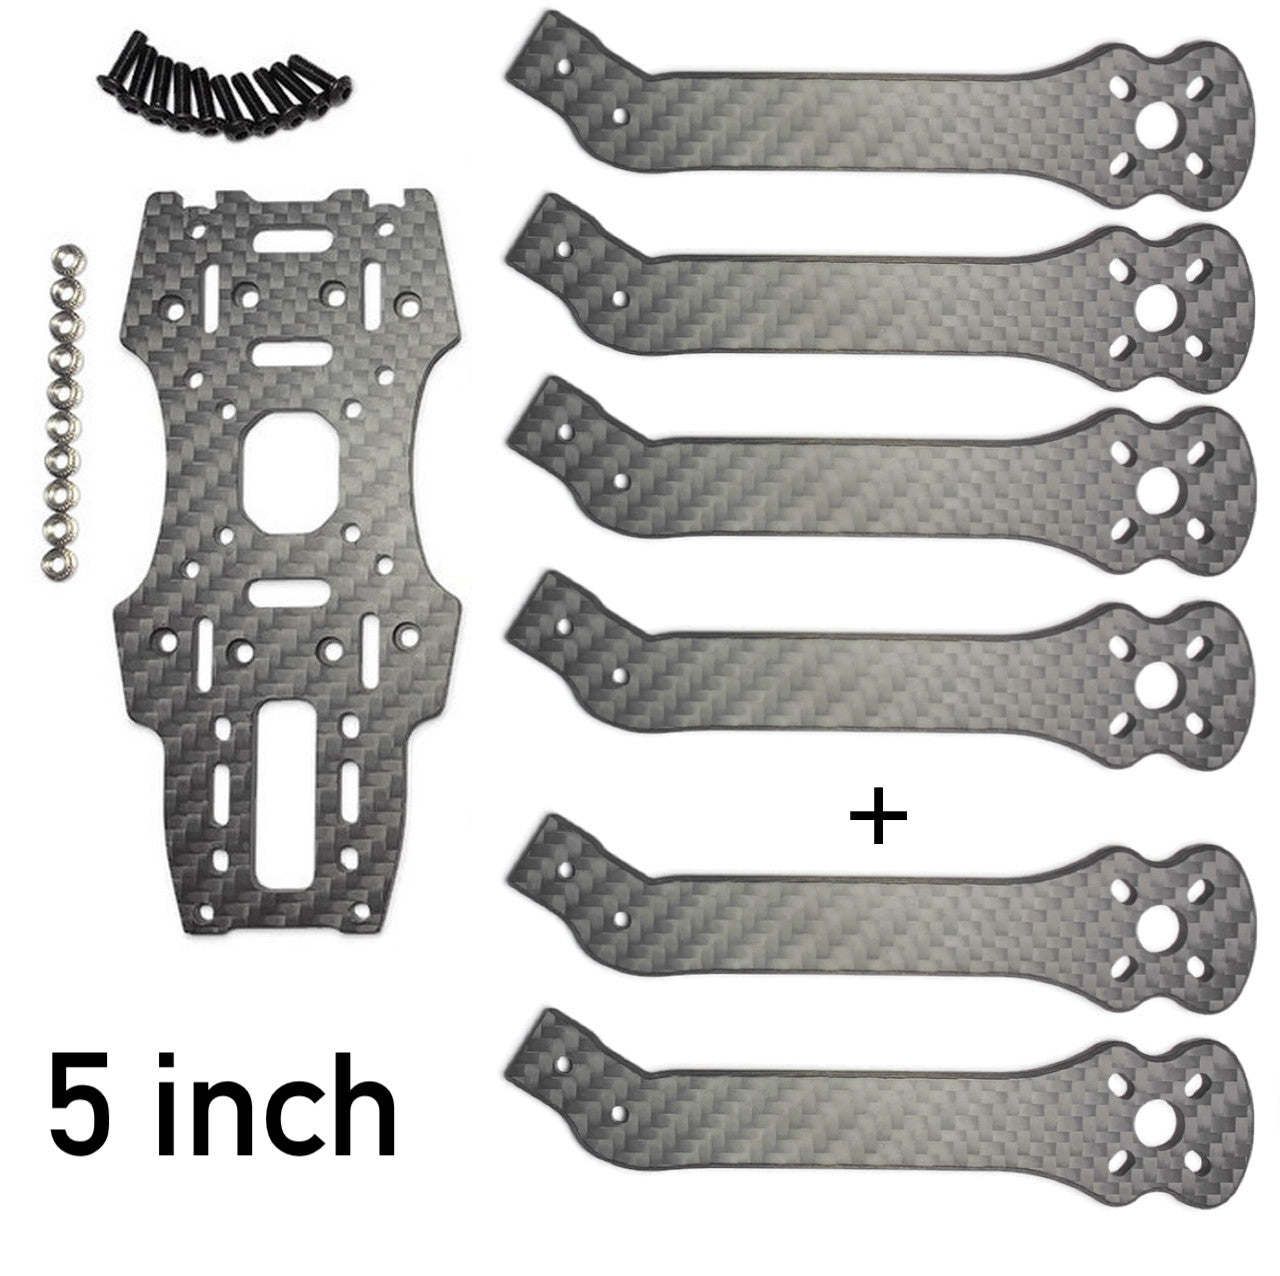 Badger Conversion Kit for Marmotte (+2 extra arms) - Choose 5" or 6"